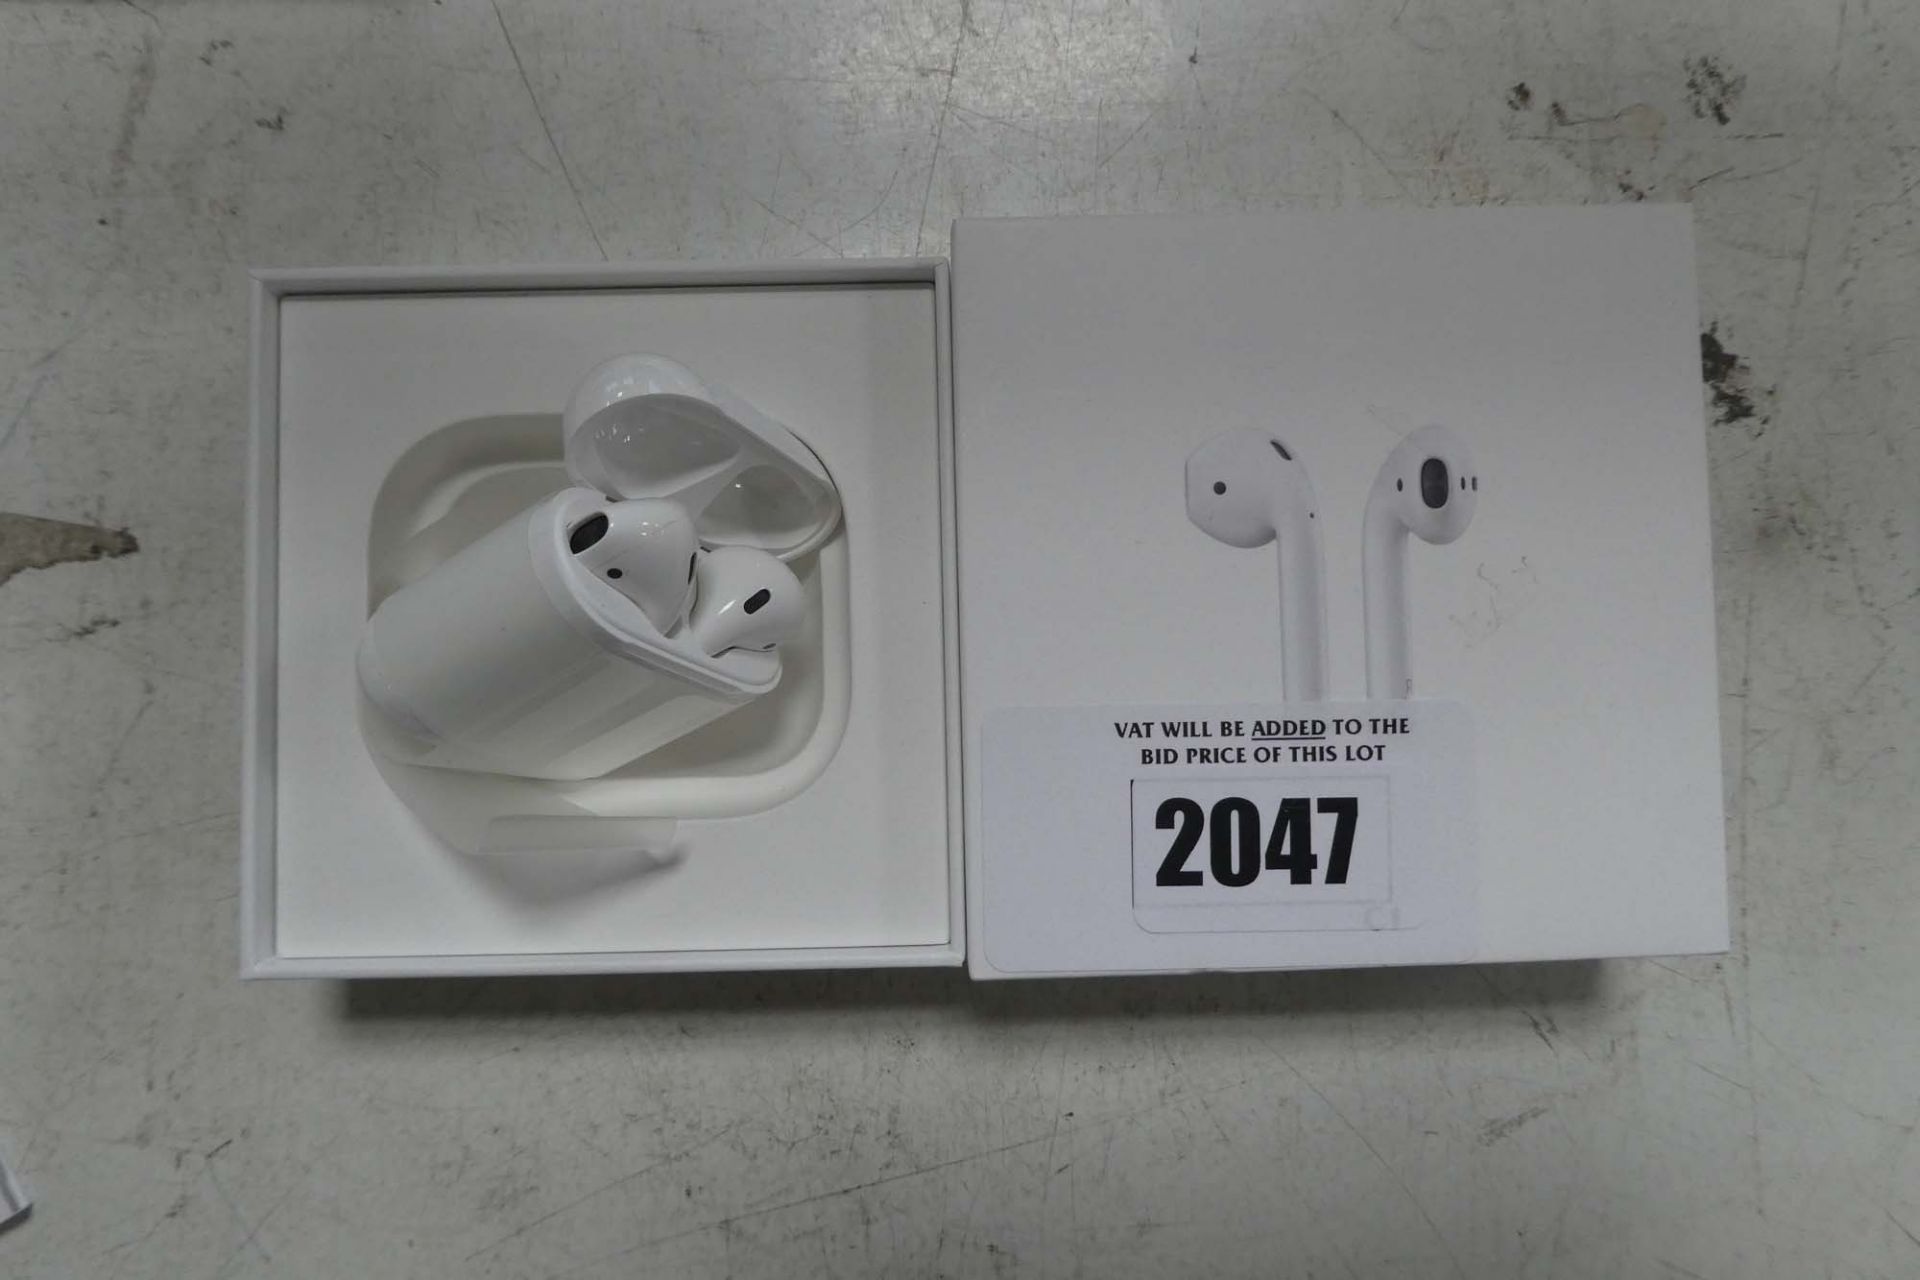 Apple airpods 1st Gen. with charging case and box